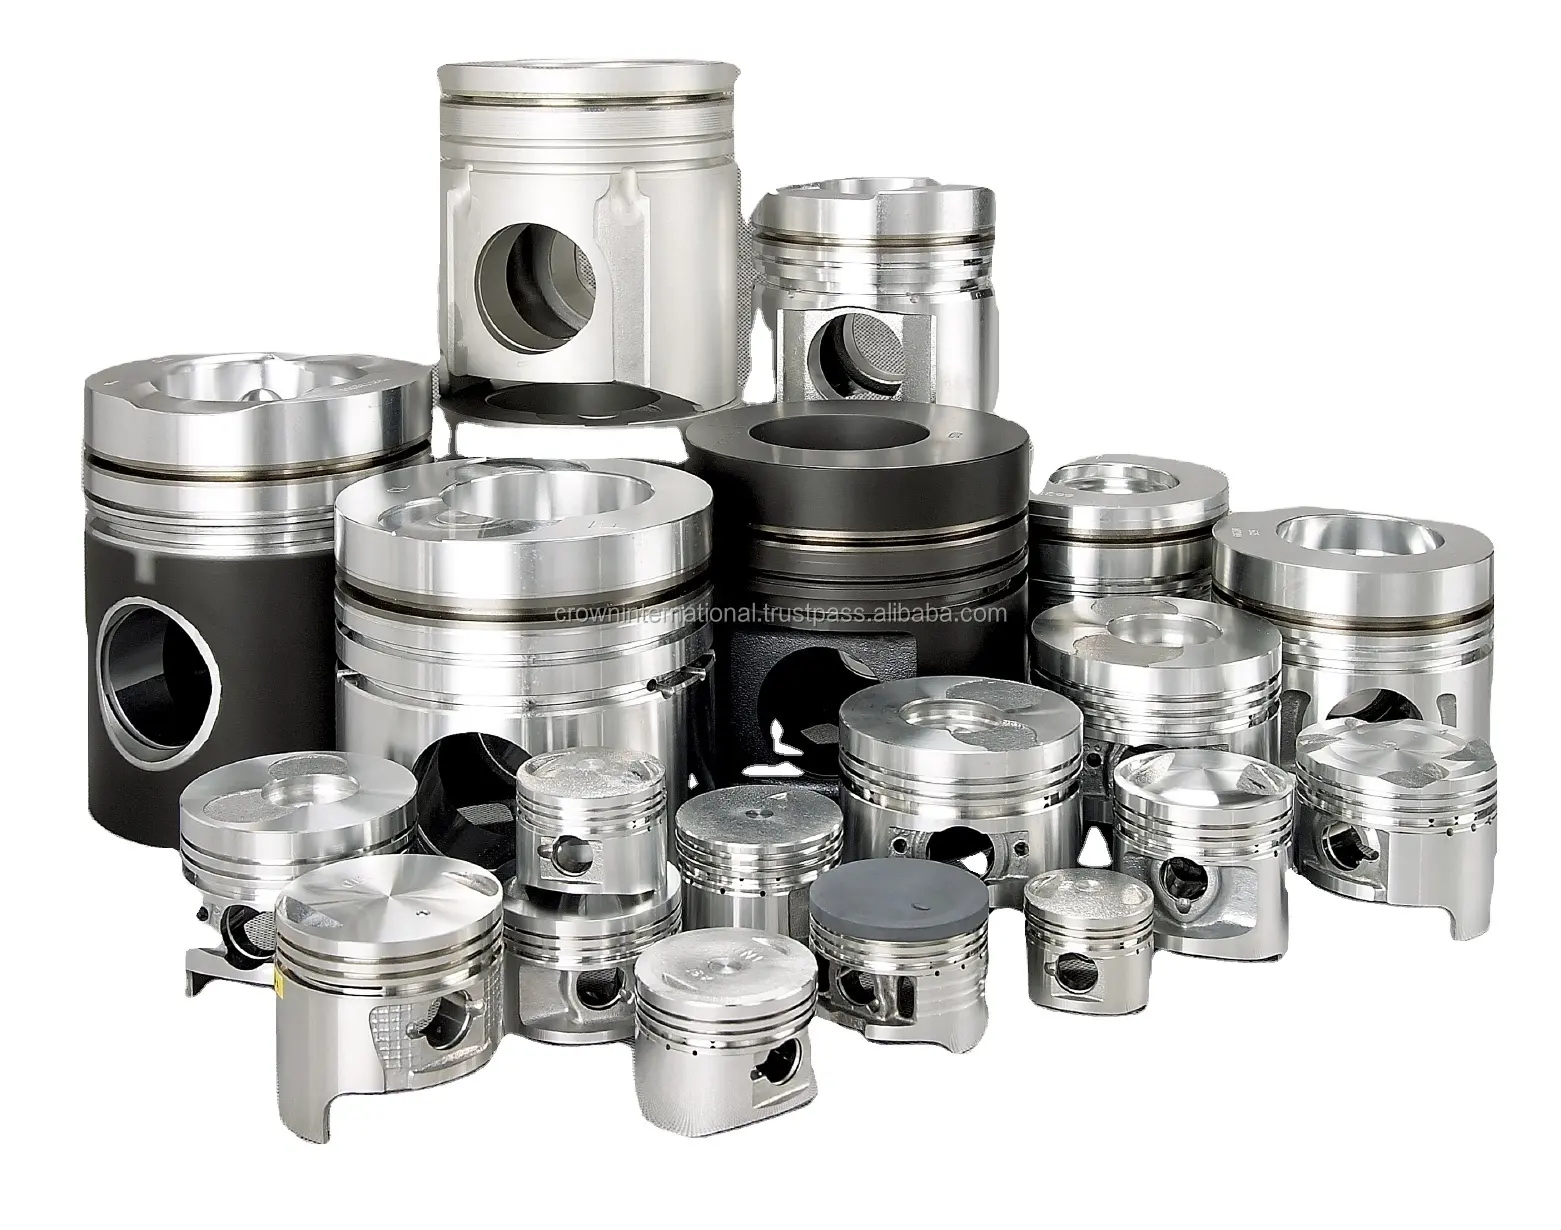 76mm Piston with Gudgeon Pin Kit Assembly fir for Fiiat Engine Spare Parts in Factory Price